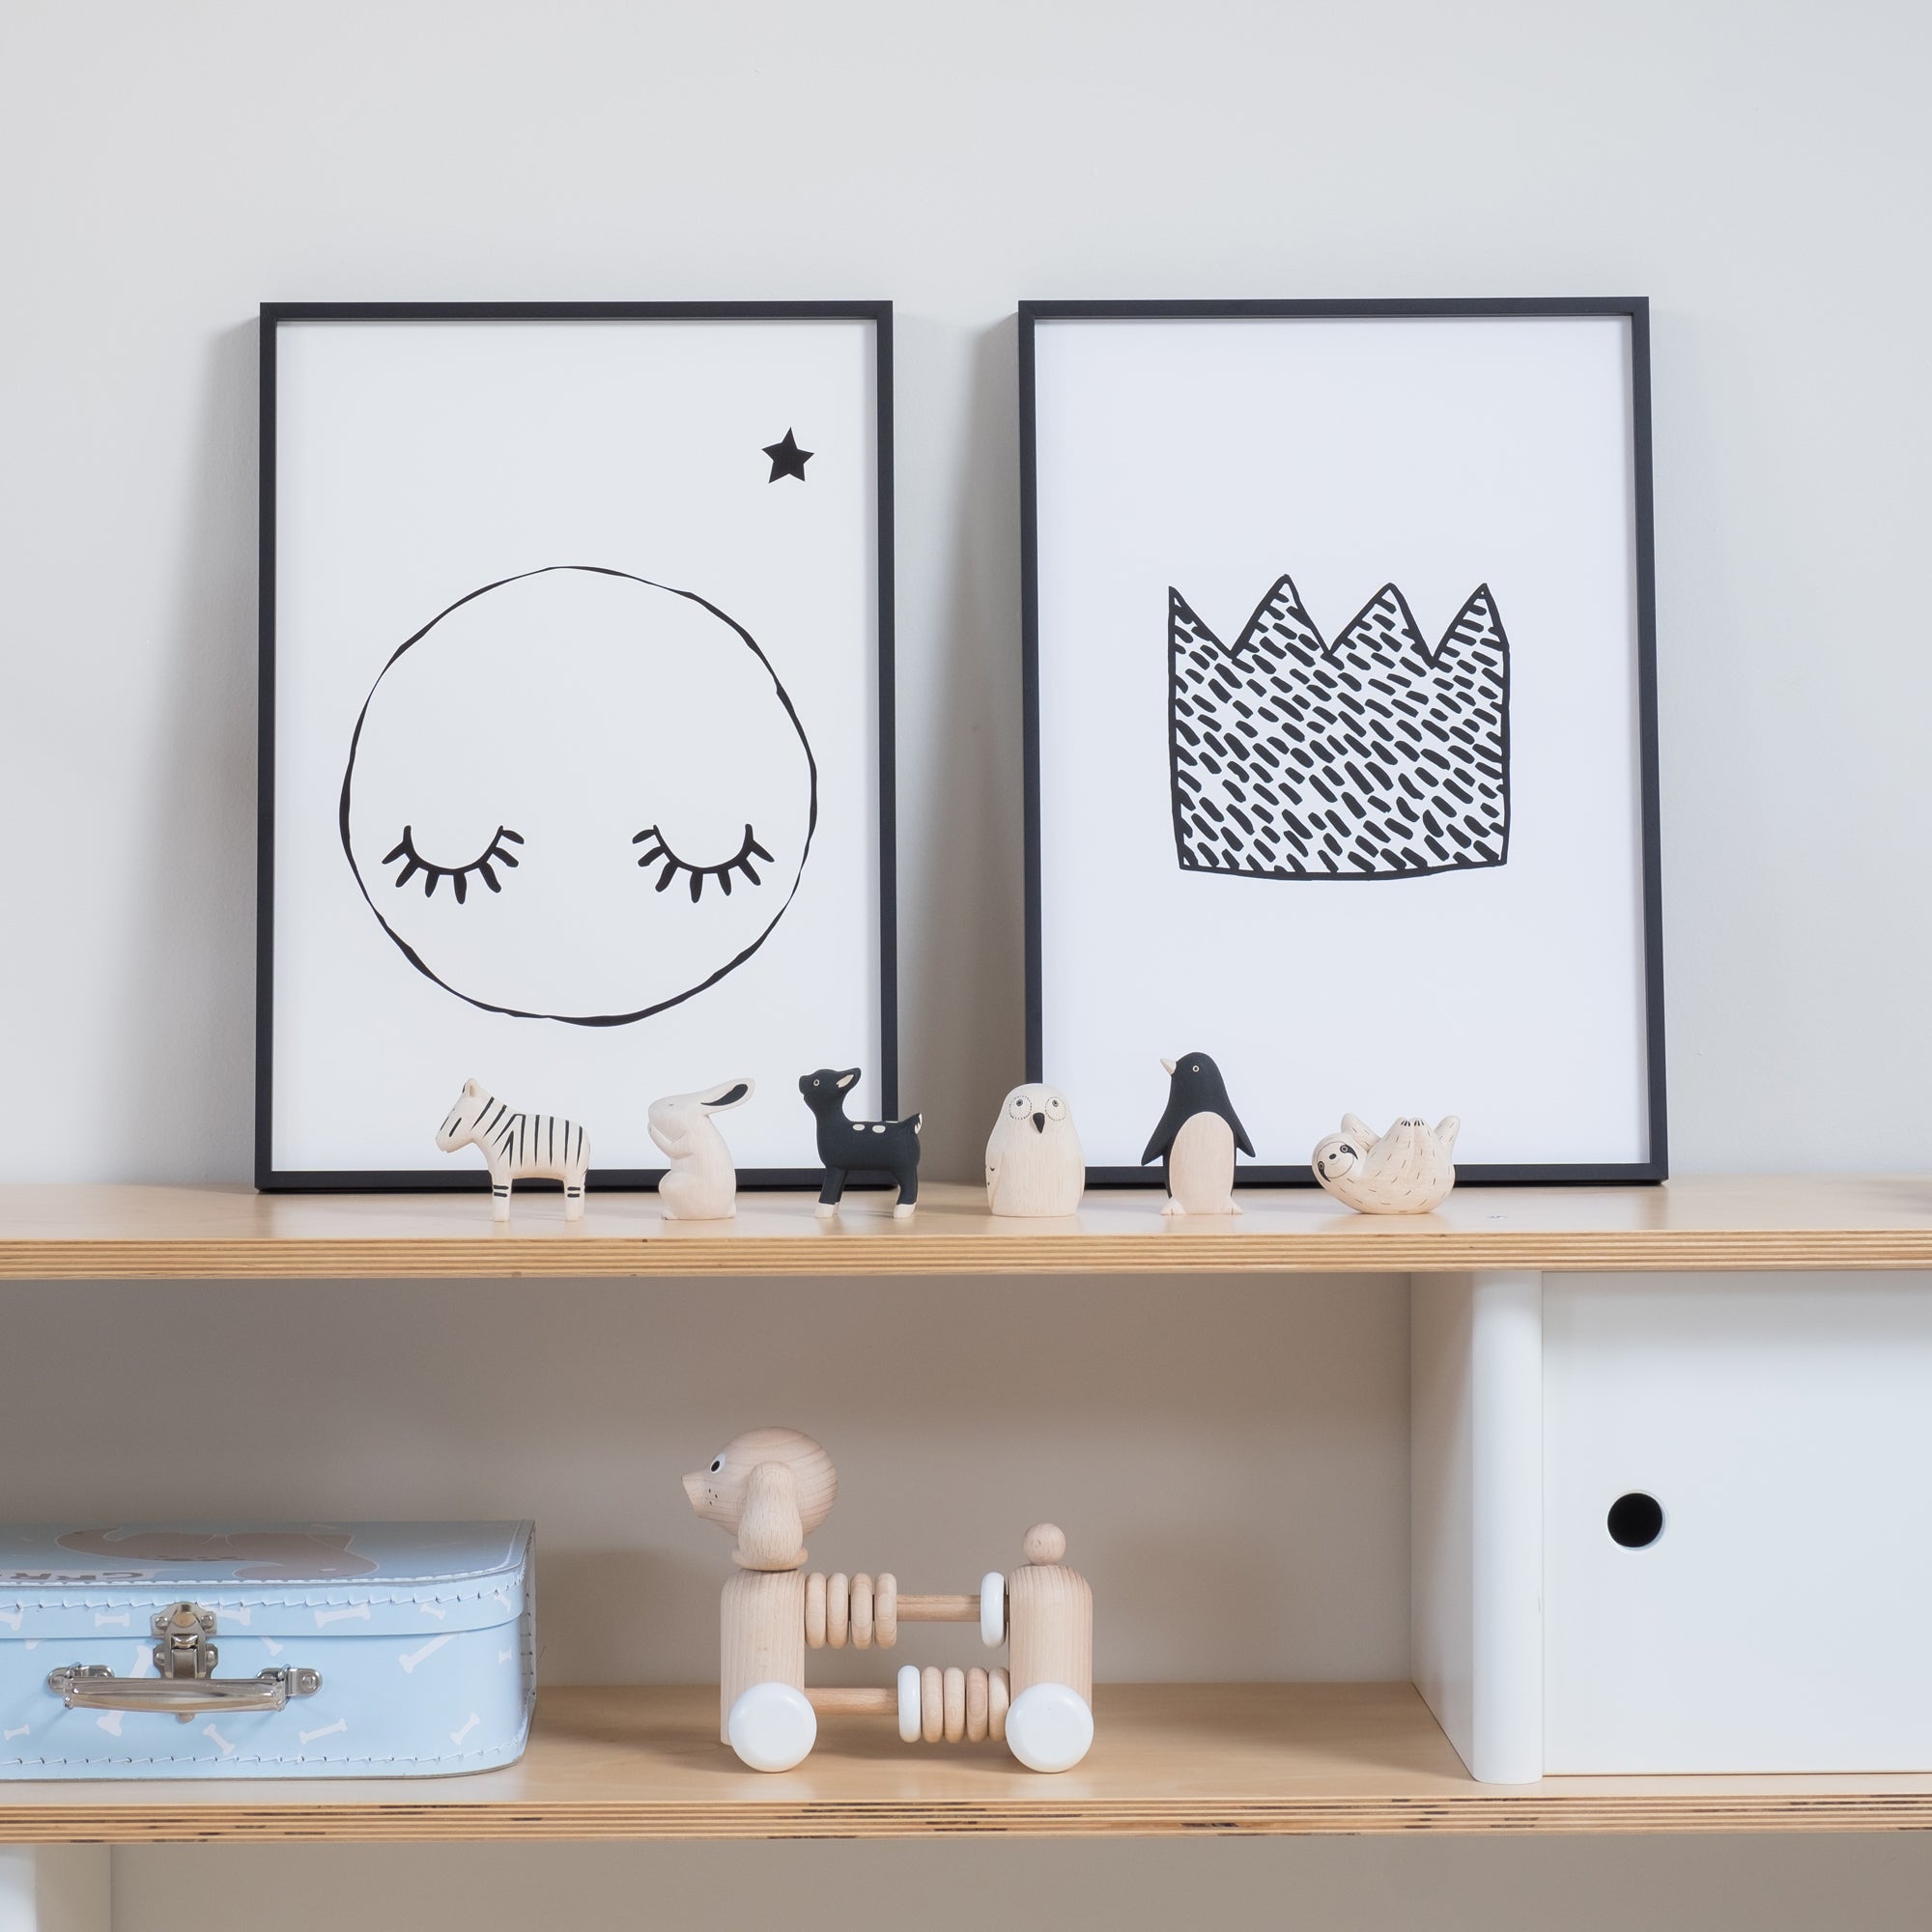 Pole-Pole Animals and A3 Prints by Rory and The Bean and Wonder and Rah, available at Bobby Rabbit.